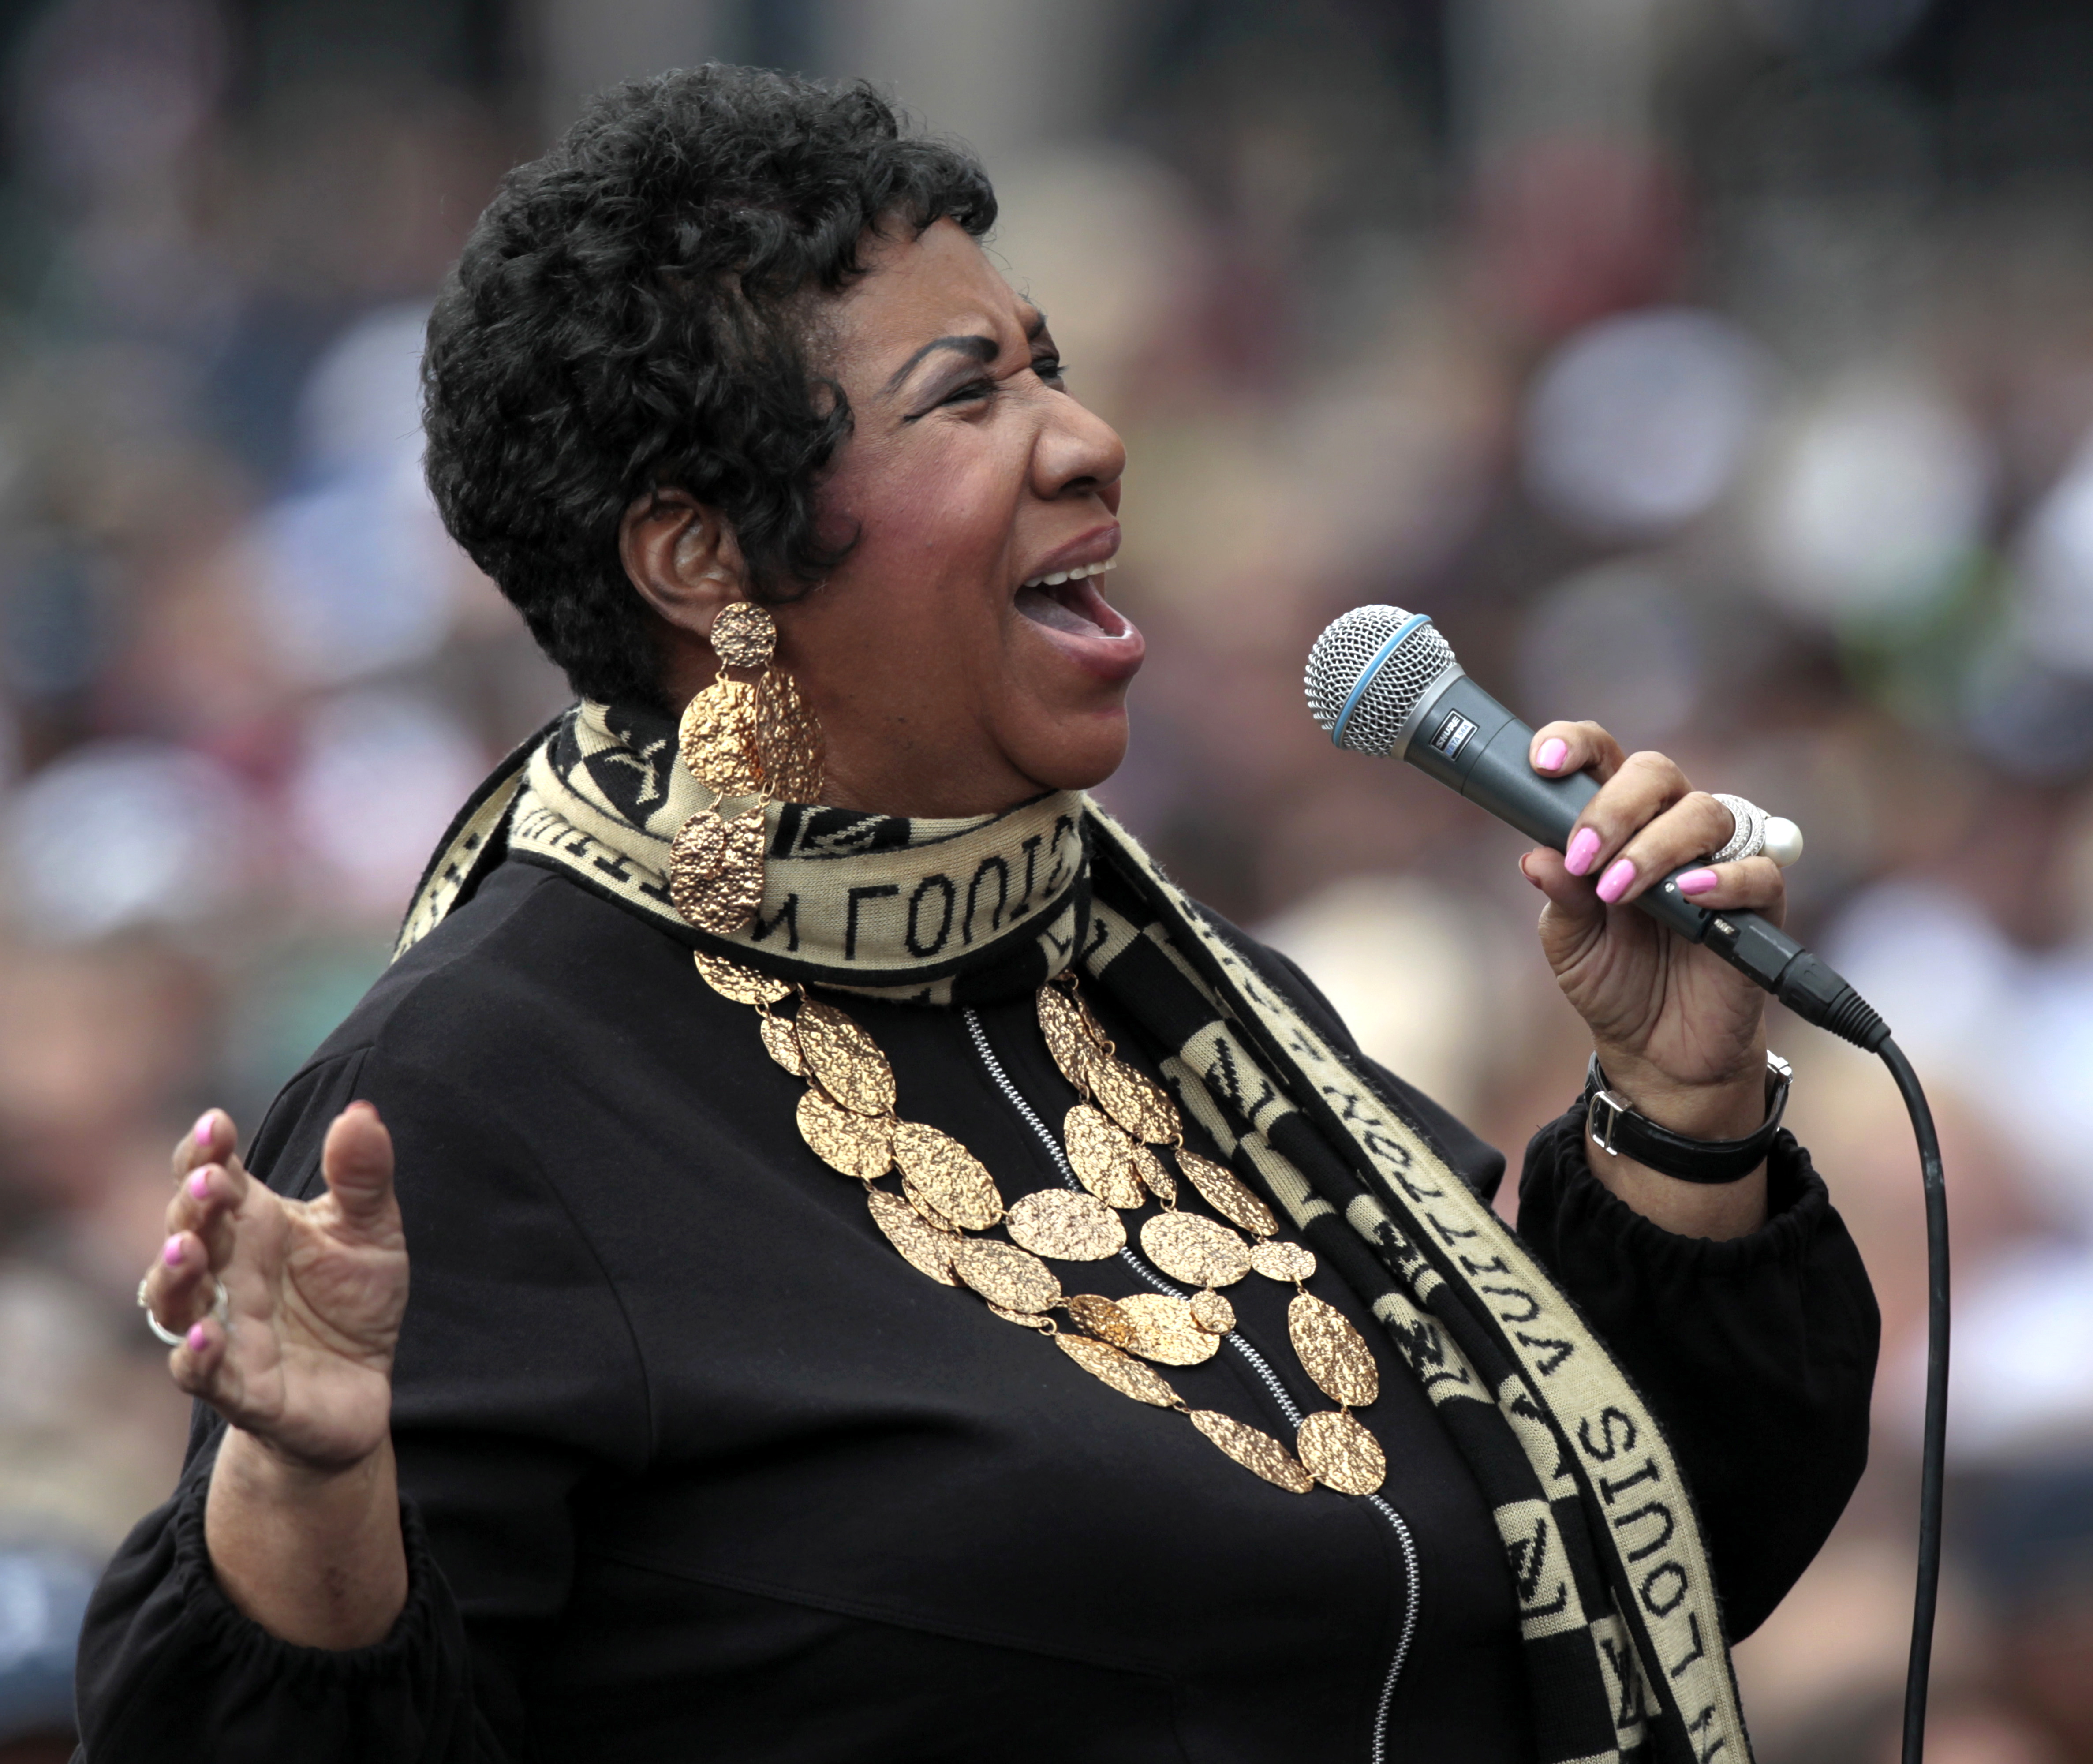 epa06947727 (FILE) - A file picture dated 05 September 2011 shows US singer Aretha Franklin performing at a Labor Day event outside of the Renaissance center in Detroit, Michiganm USA (reissued 13 August 2018). Media reports on 13 August 2018 state Roger Friedman, a journalist and family friend, made a statement on his website Showbiz 411 on 13 August saying Aretha Franklin is seriously ill and surrounded by her relatives. Franklin was diagnosed with cancer in 2010.  EPA/JEFF KOWALSKY *** Local Caption *** 53313442